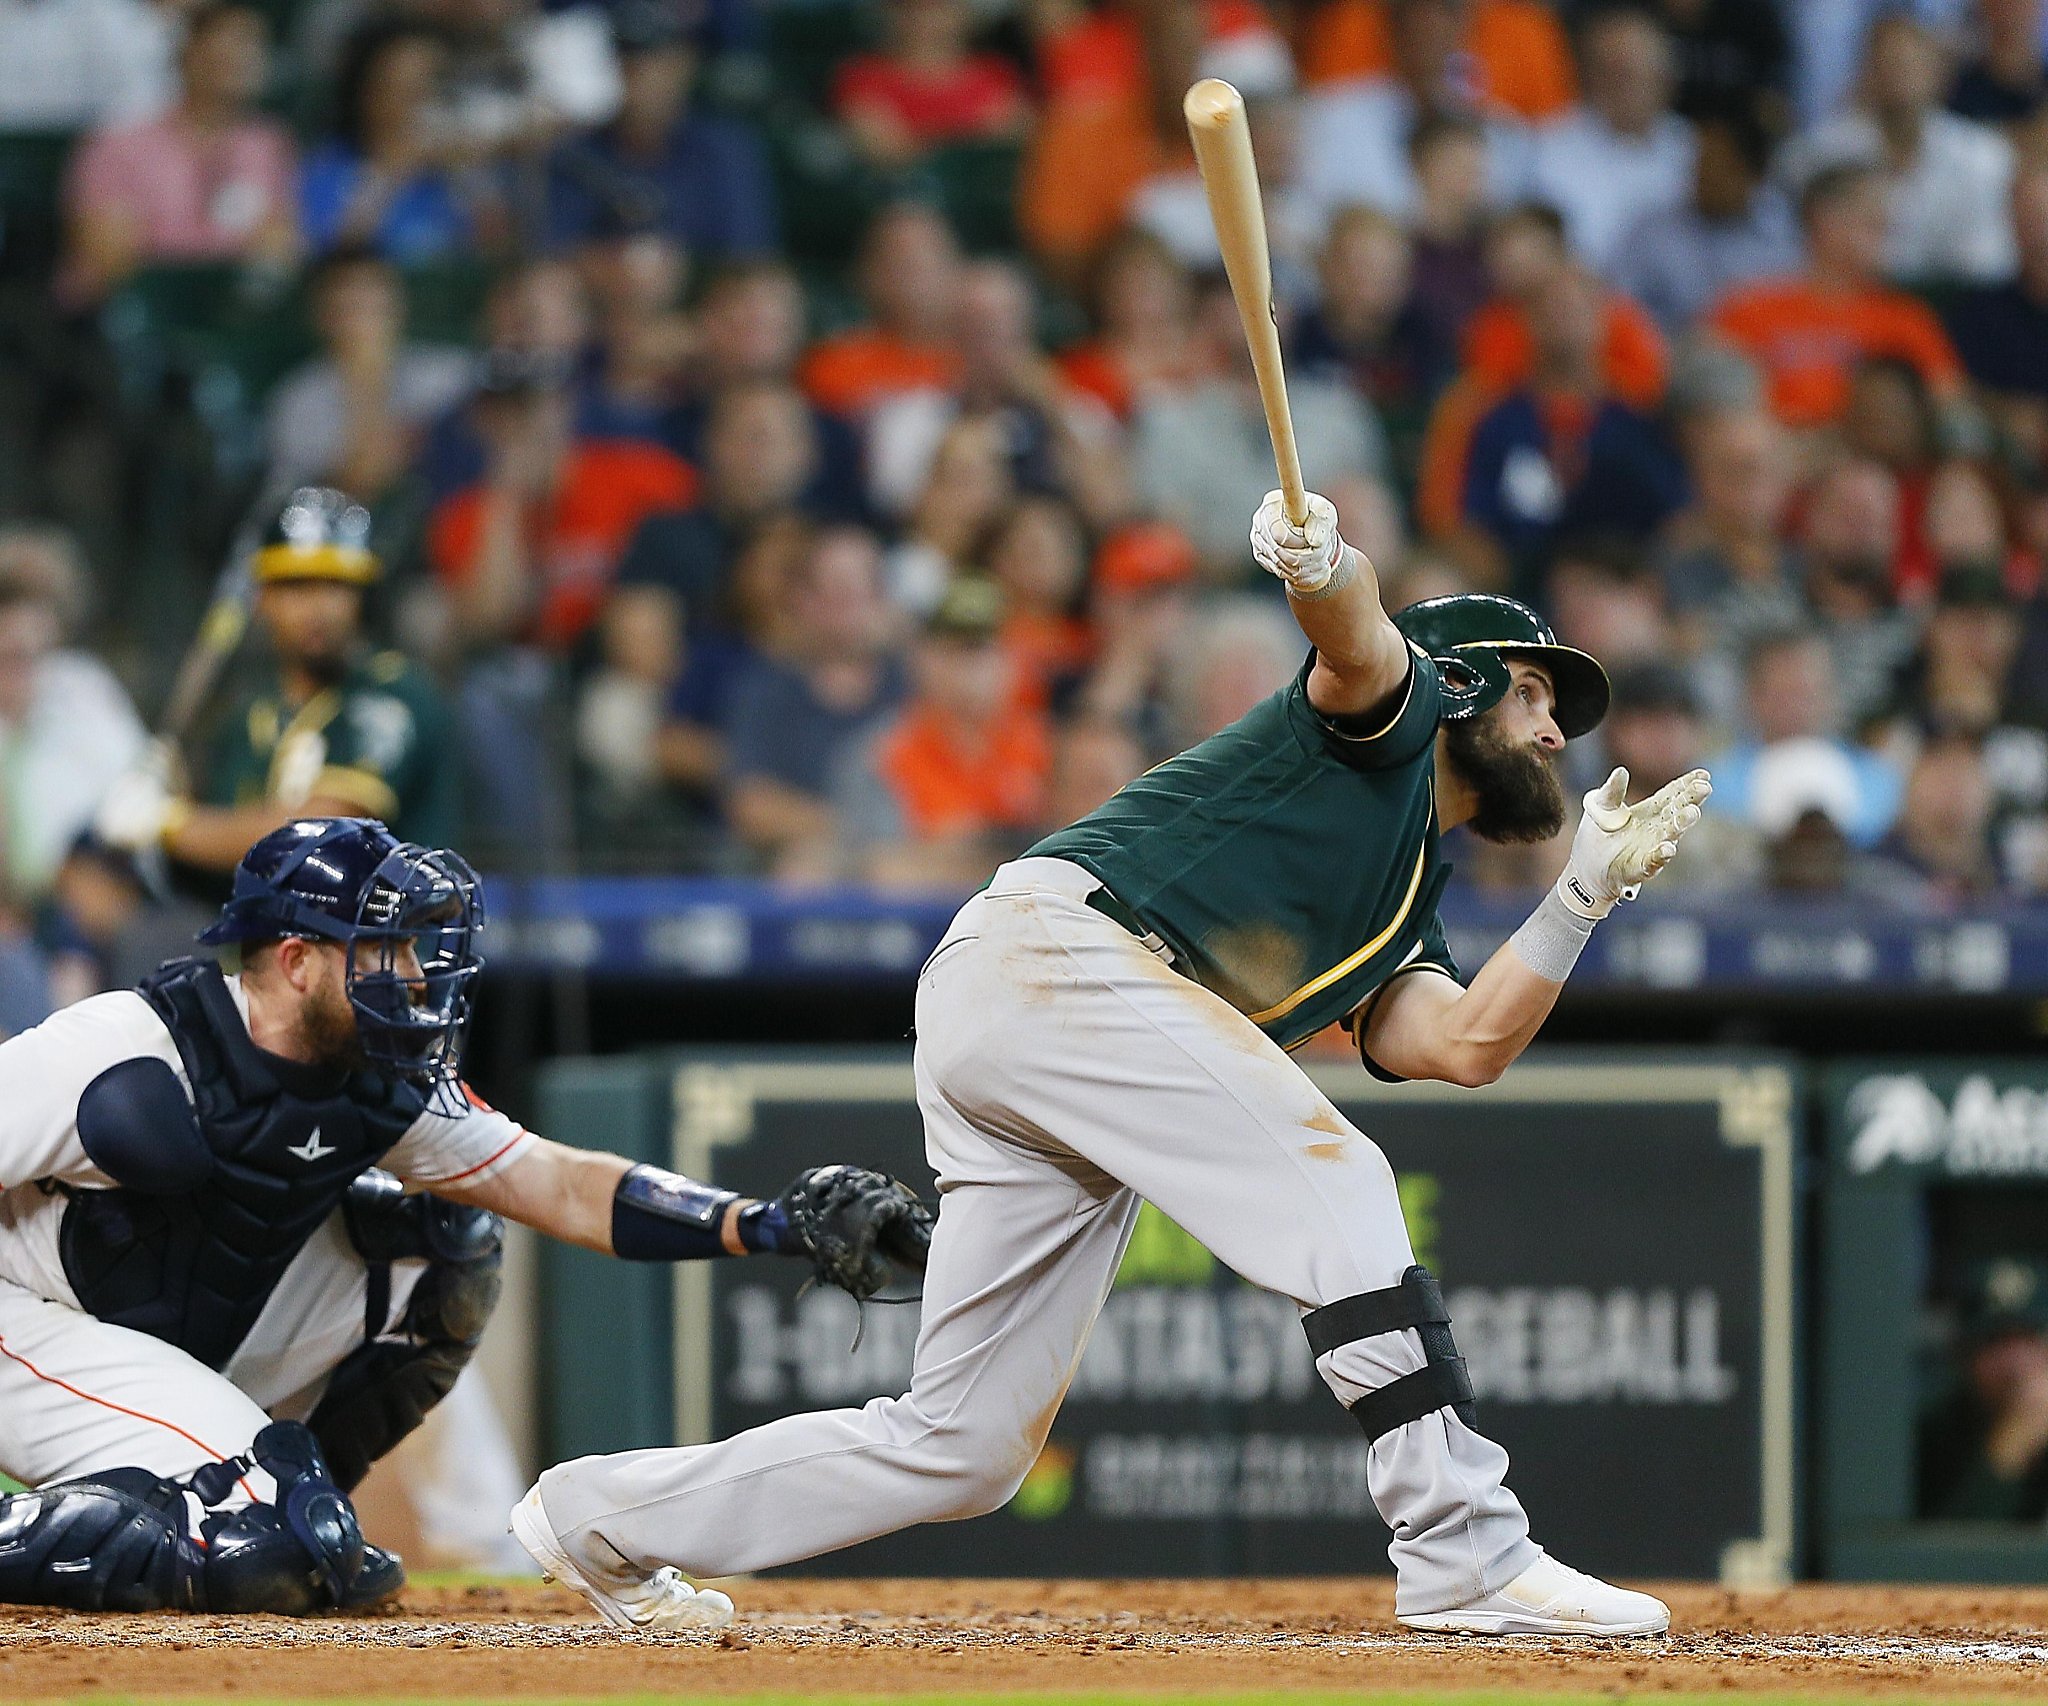 Nick Martini enjoying first big-league action with A’s - SFGate